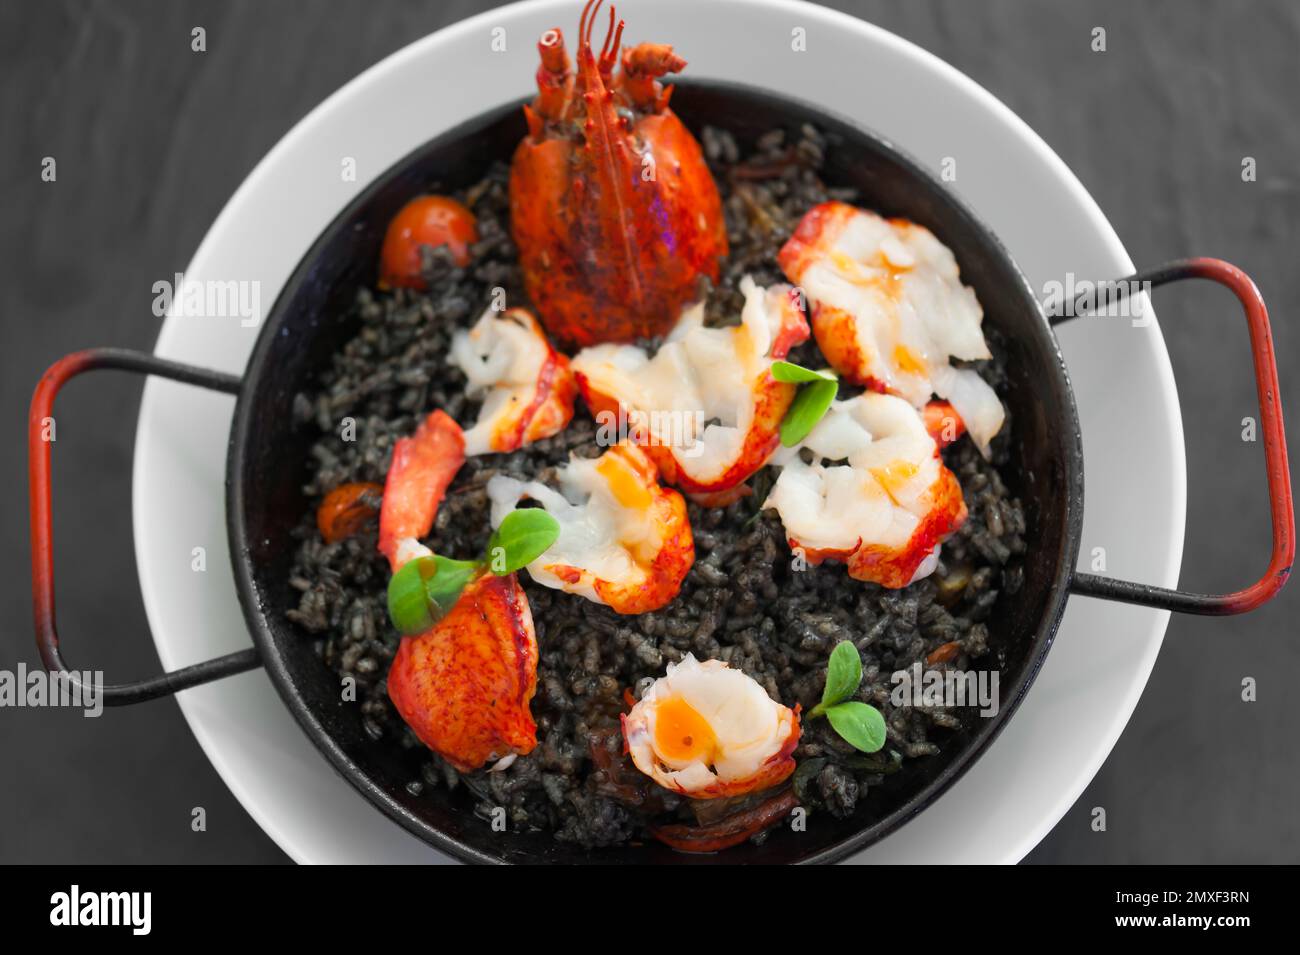 Solo paella with lobster slices, tomato chunks, squid ink sauce, herbs, saffron. Hot dish on a white plate. Meal on a black table. Modern food plating. Stock Photo